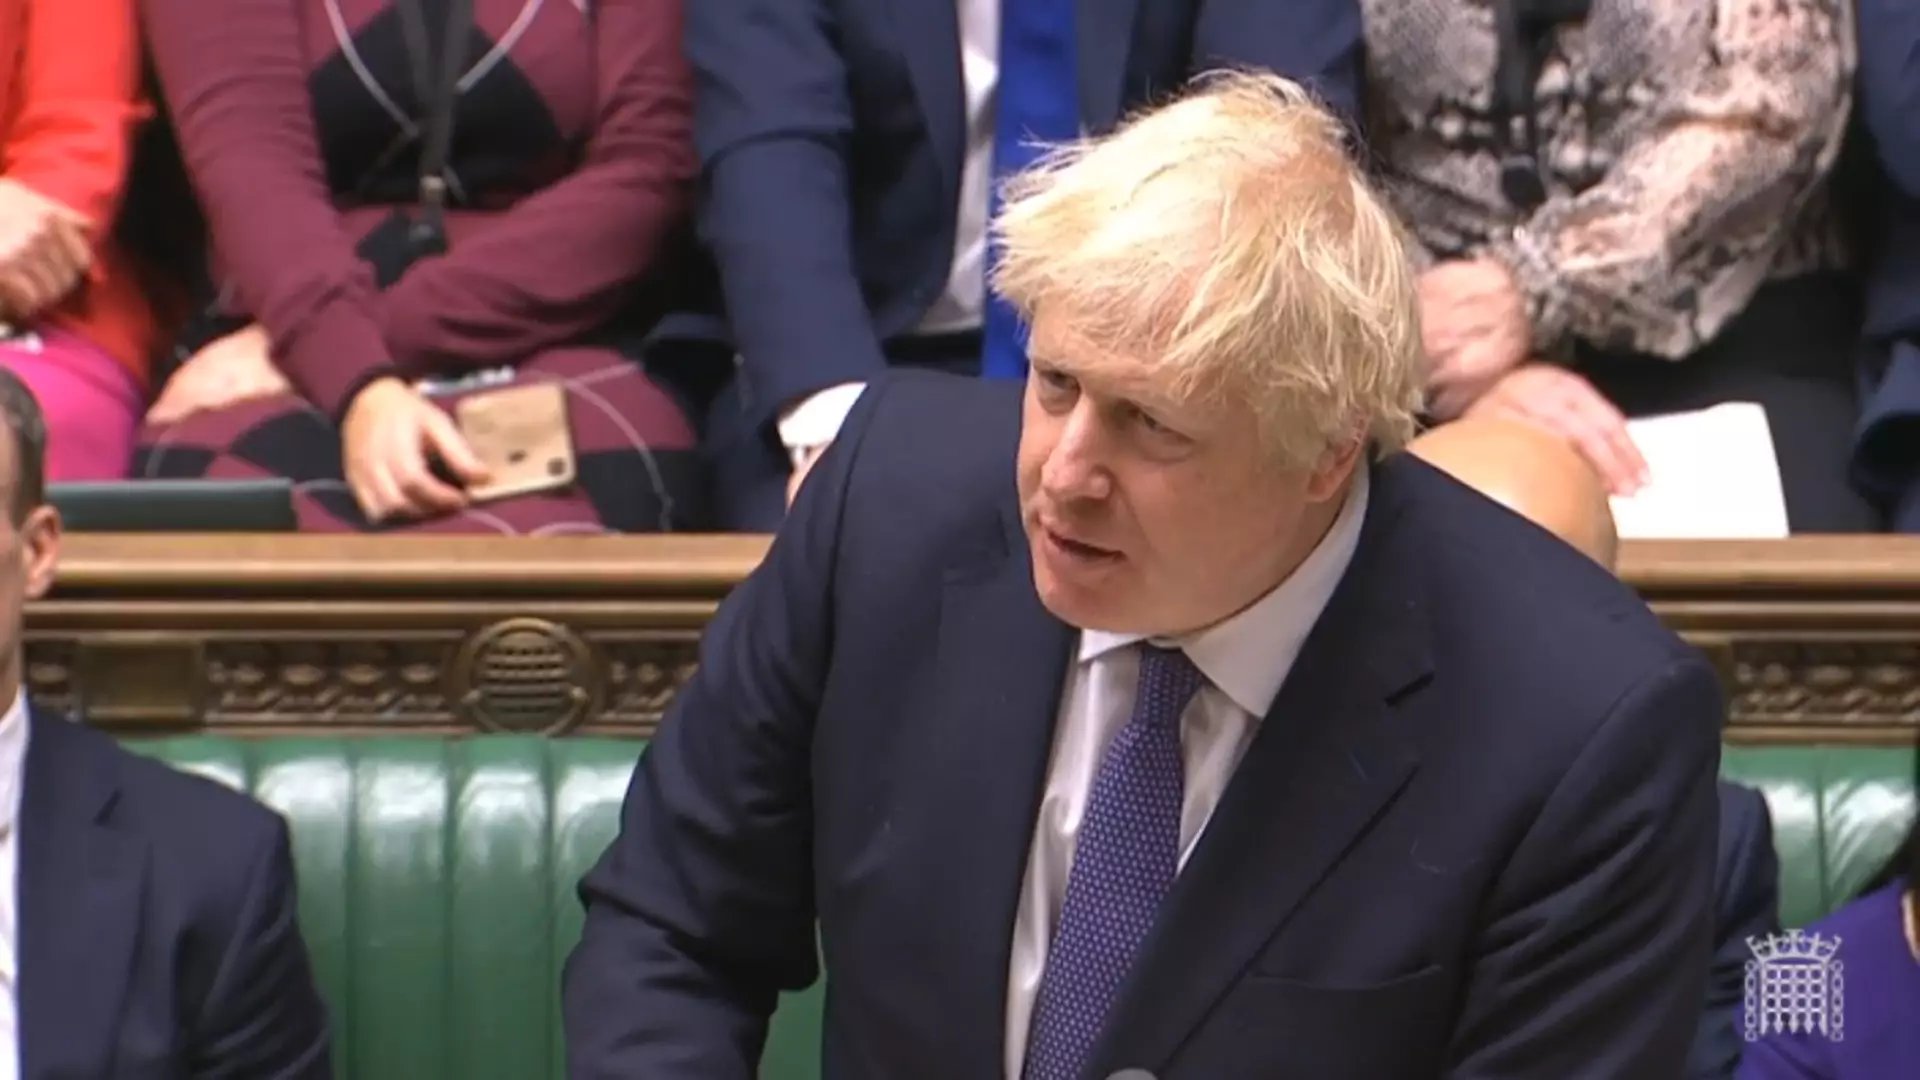 Prime Minister Boris Johnson speaks during the Brexit debate in the House of Commons, London.